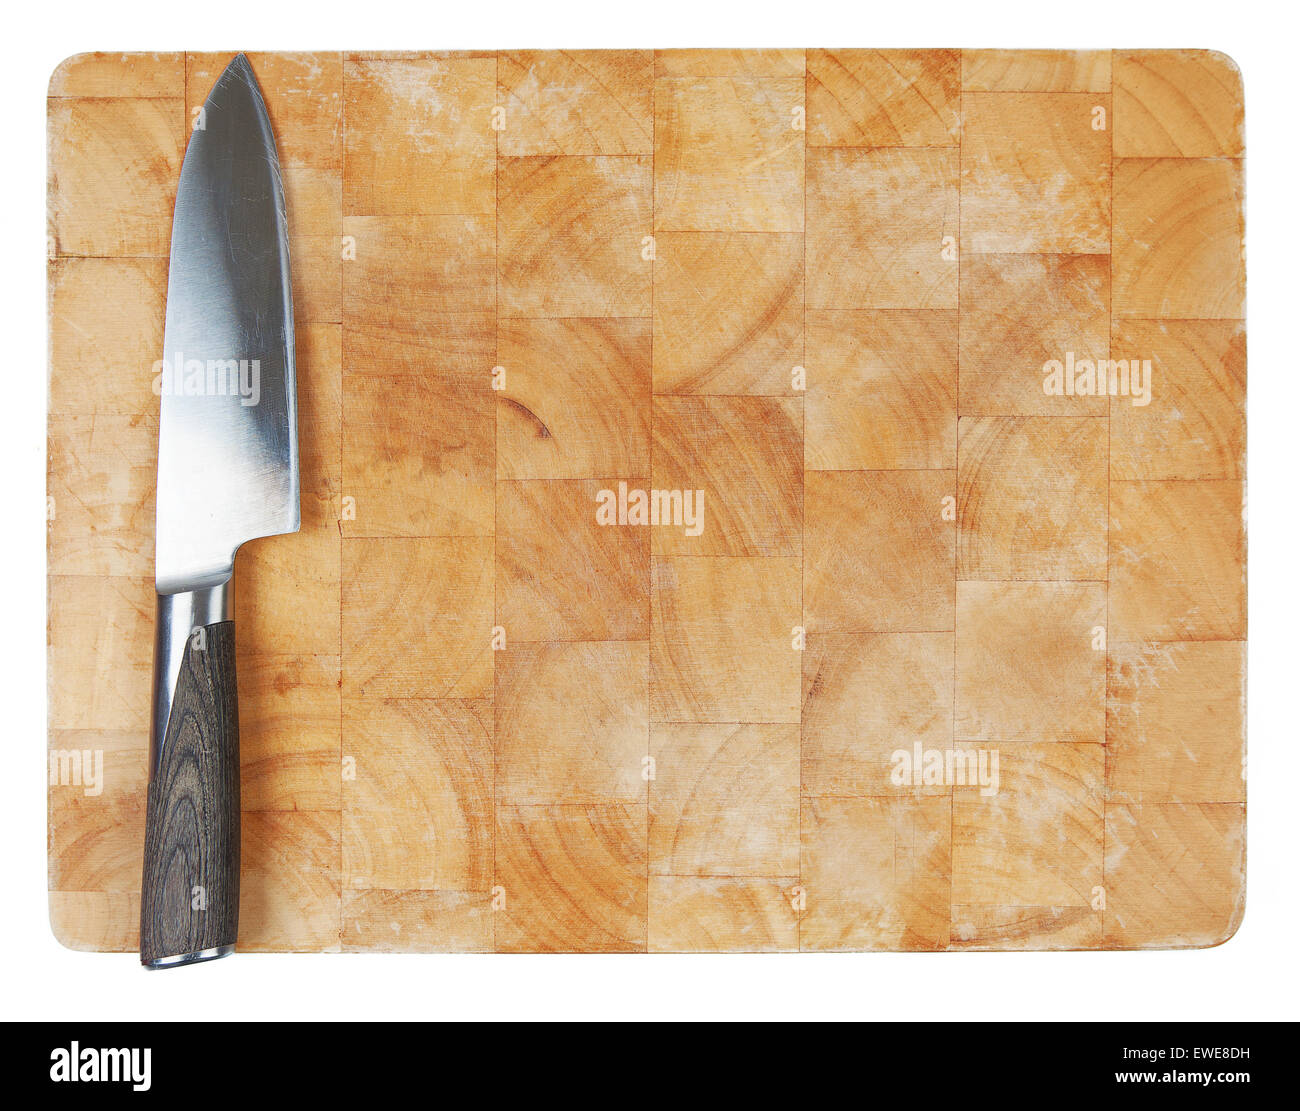 Kitchen knife laying on used chopping board. Stock Photo